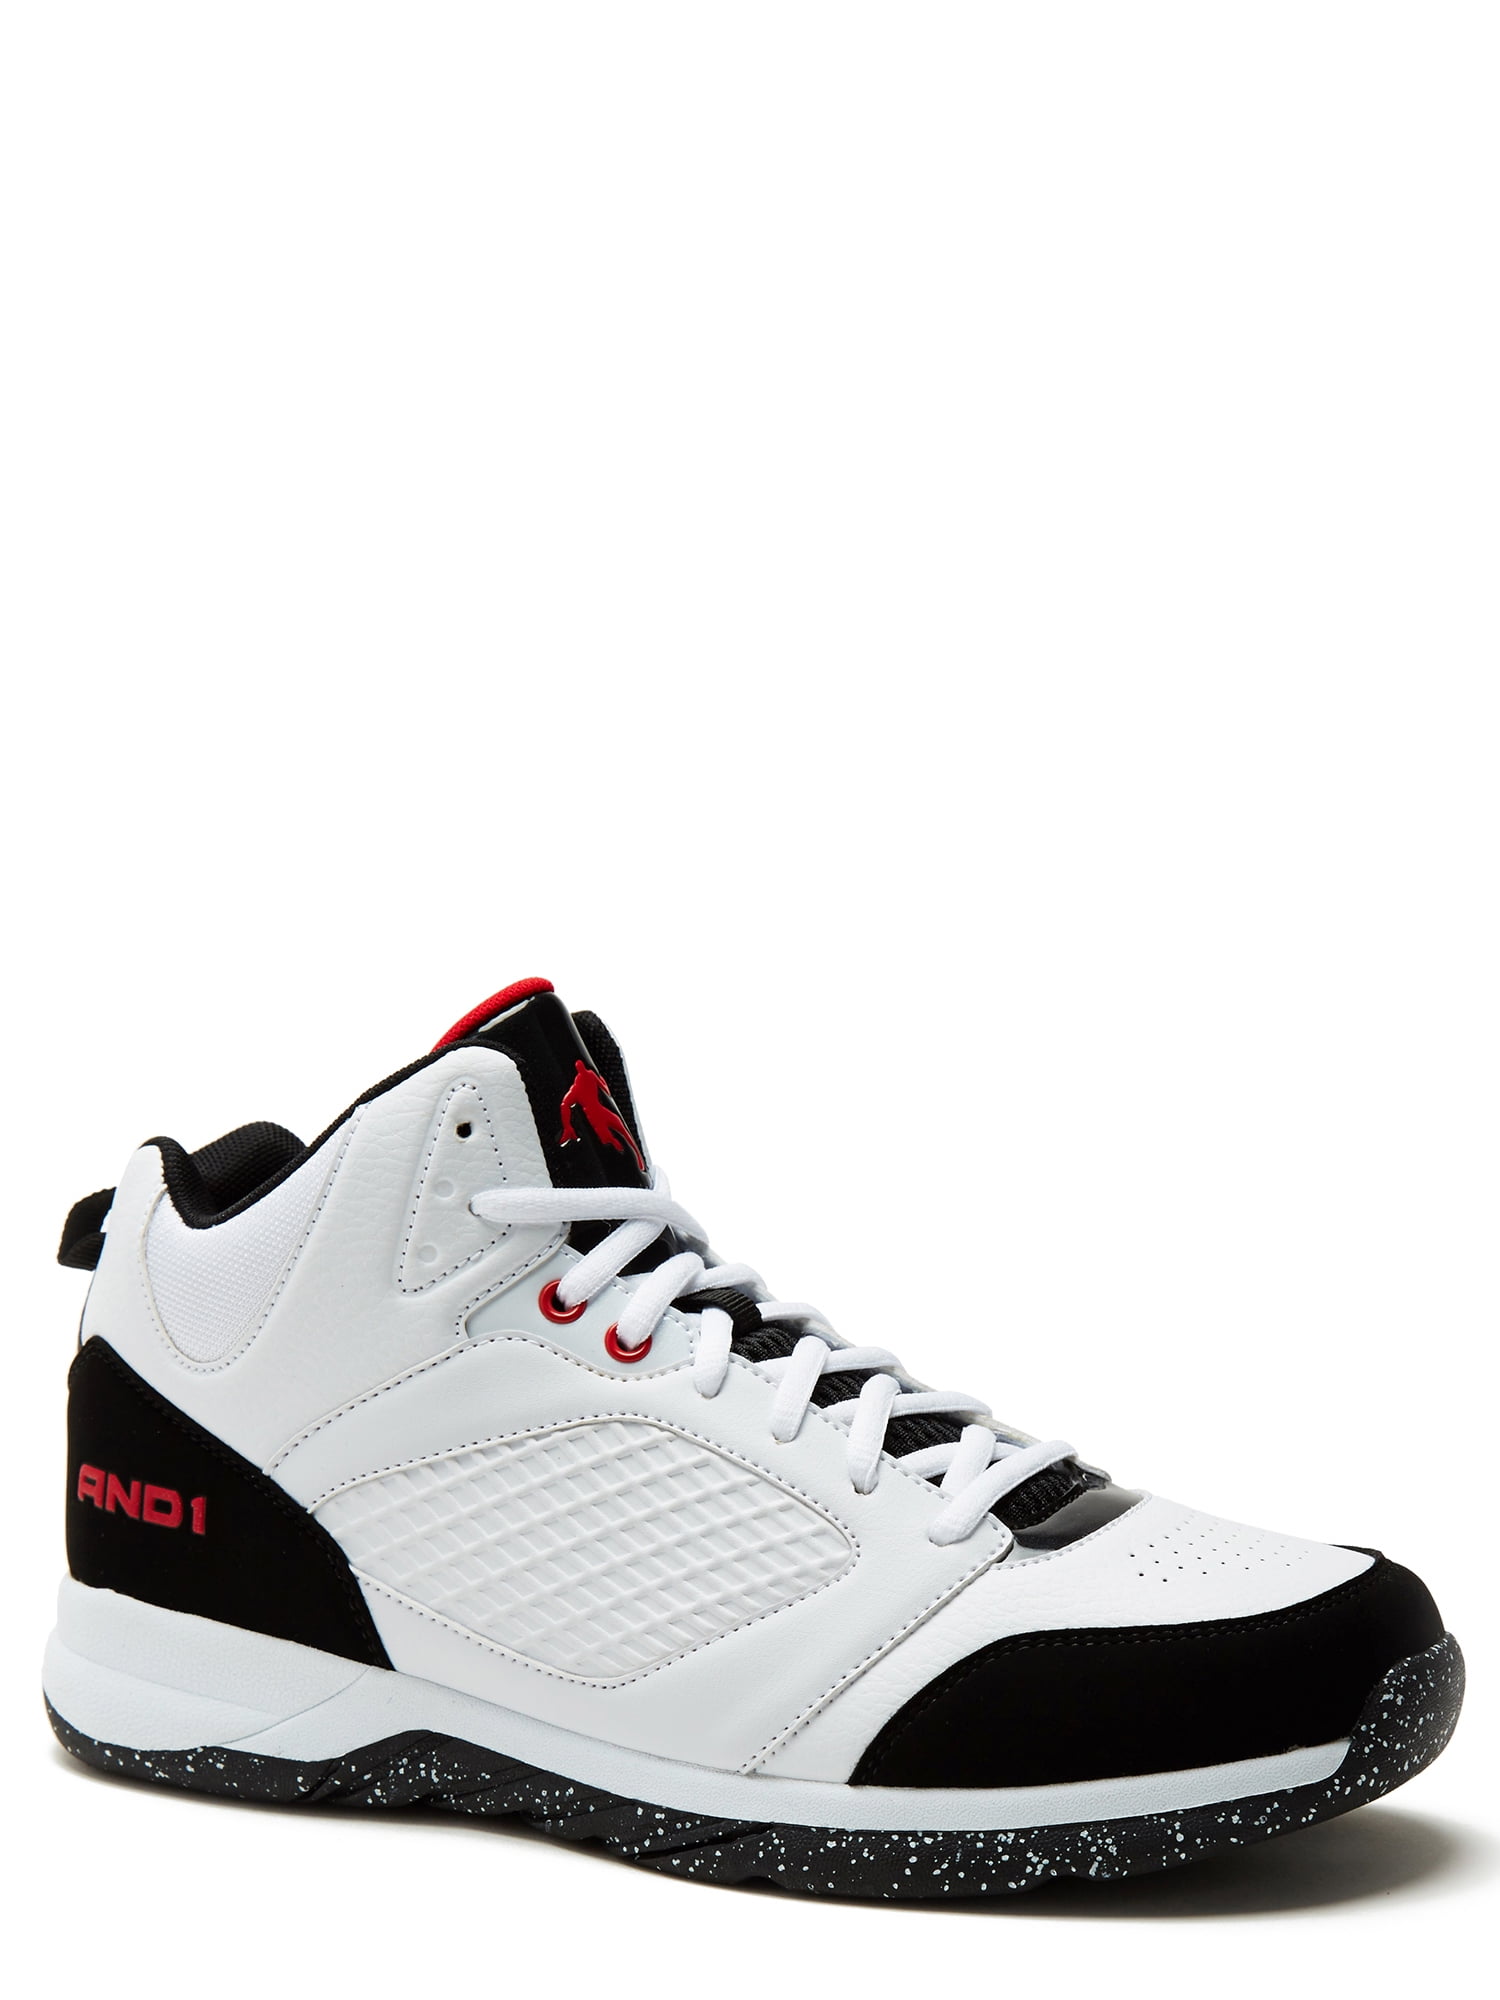 AND1 Men's Capital 2.0 Athletic Shoe 